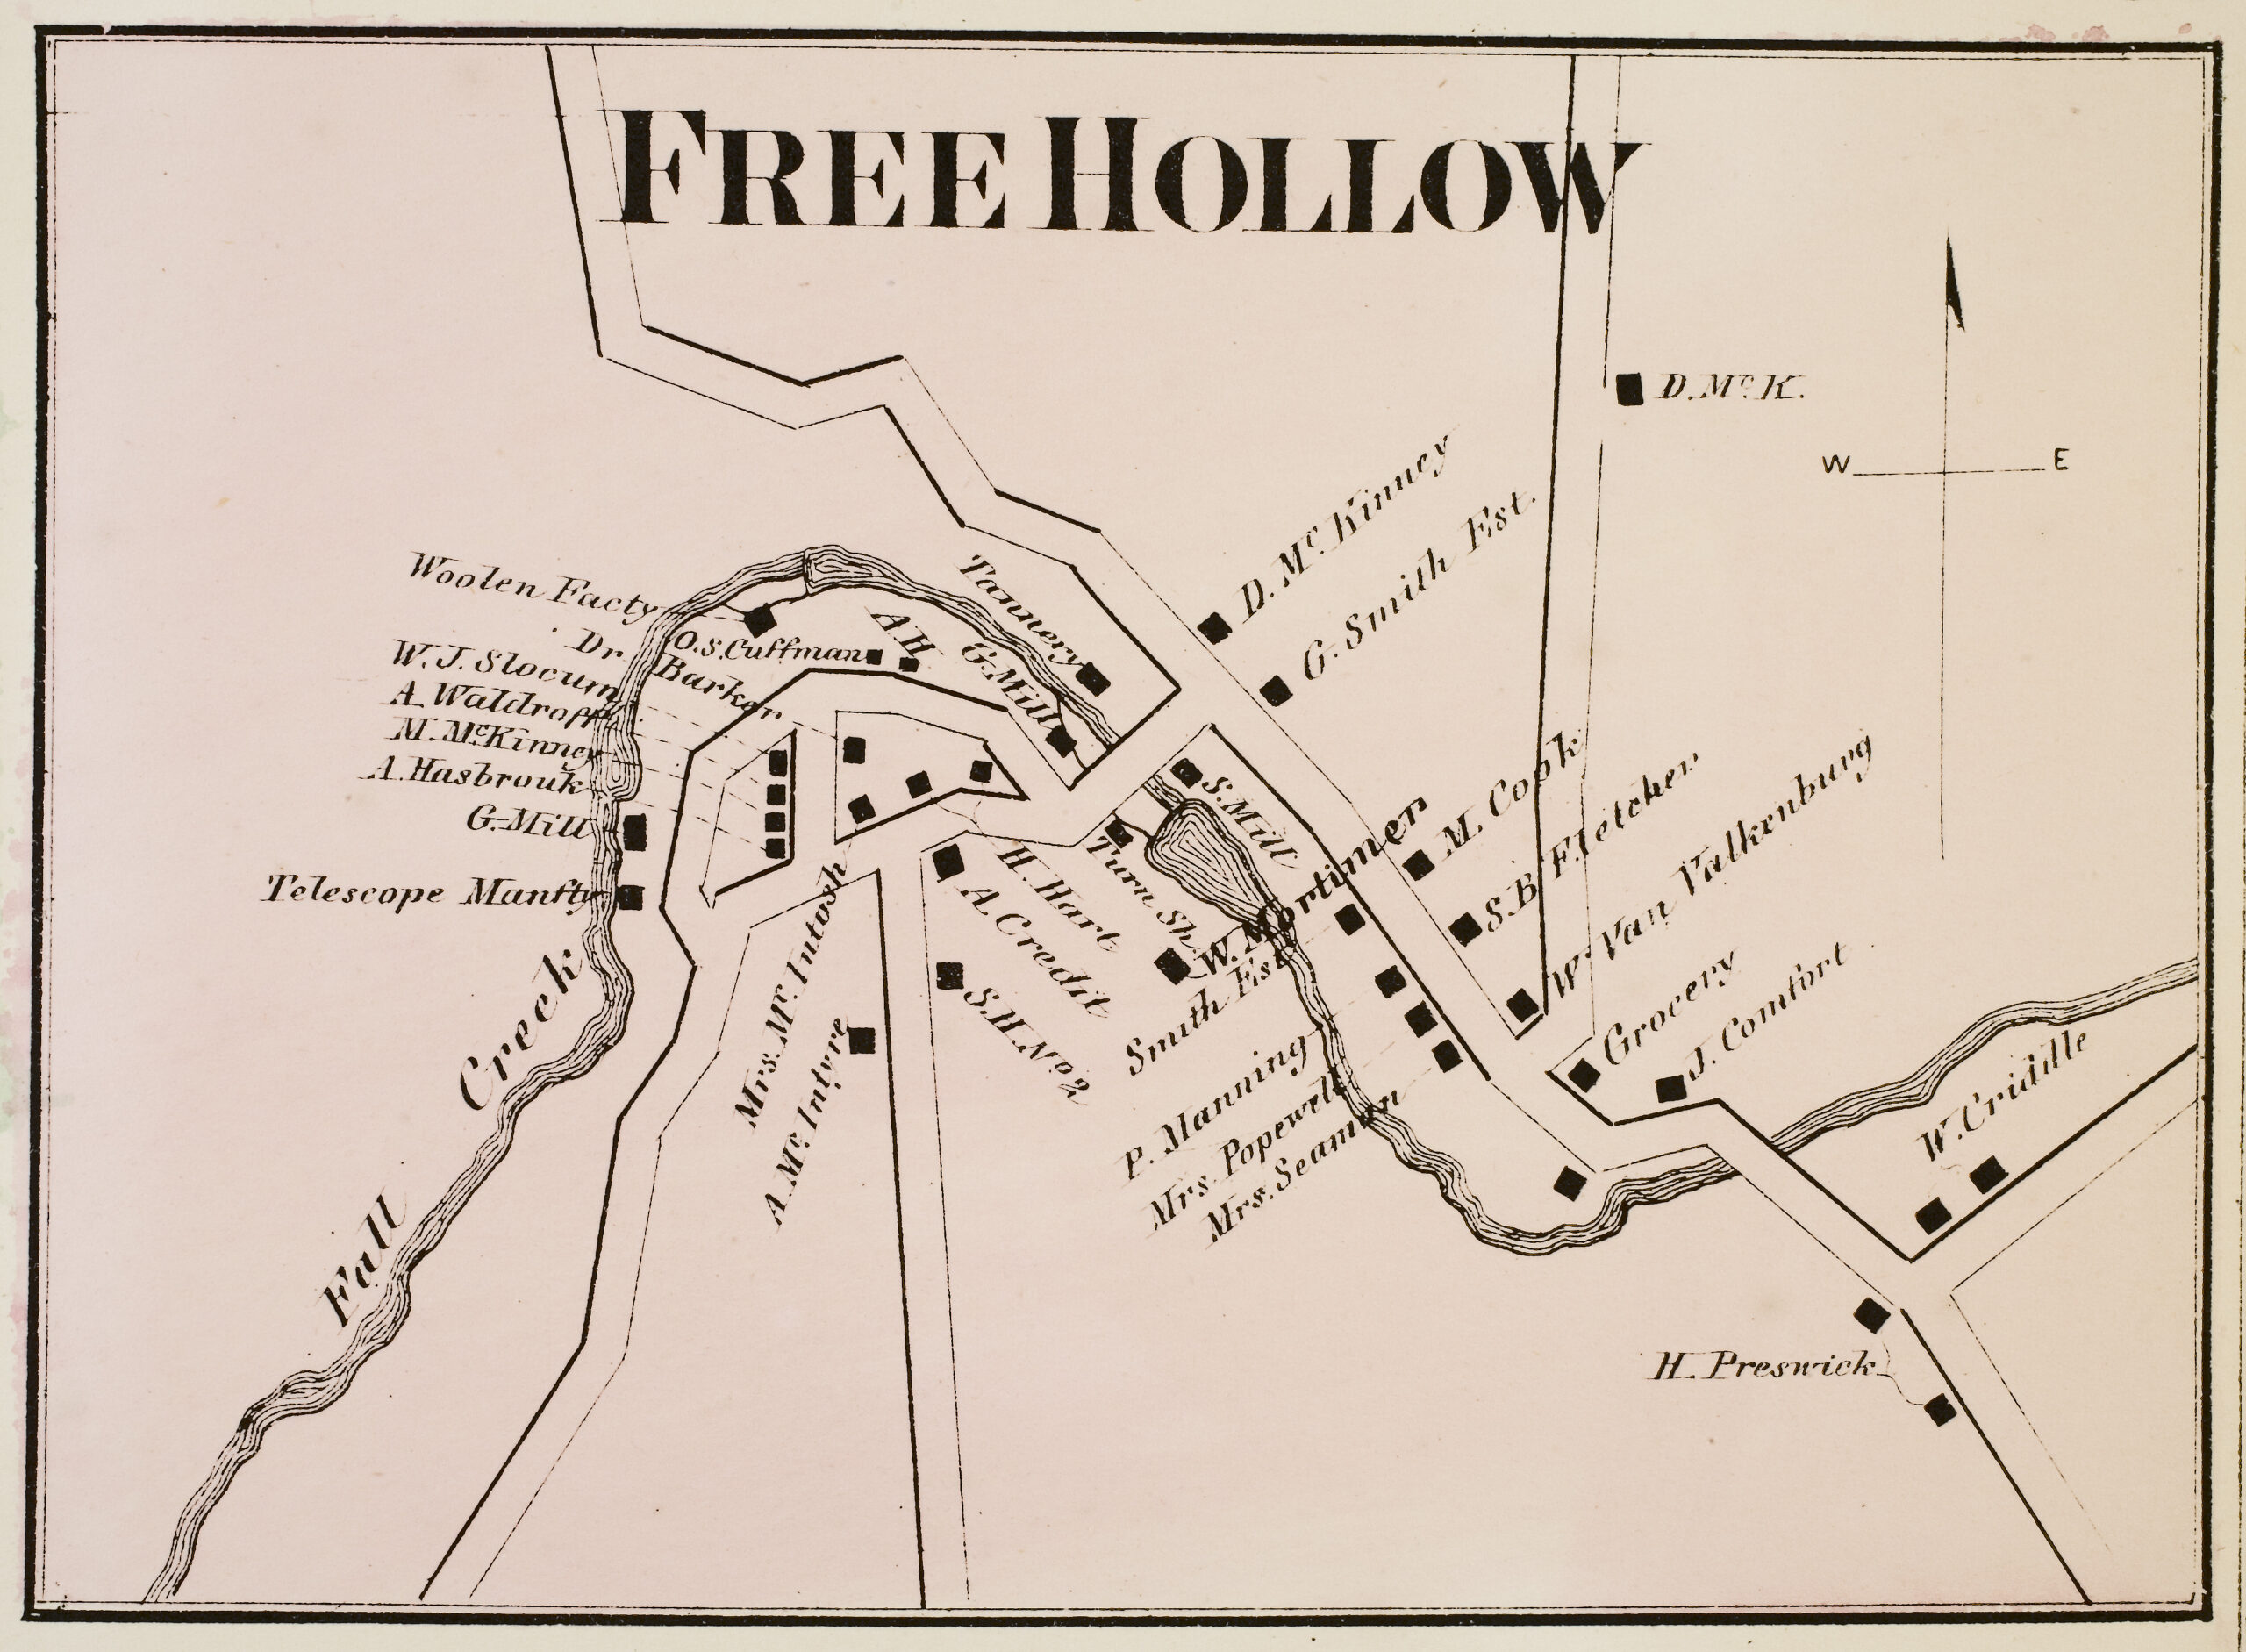 Map of Free Hollow from 1866 Tompkins County Atlas.